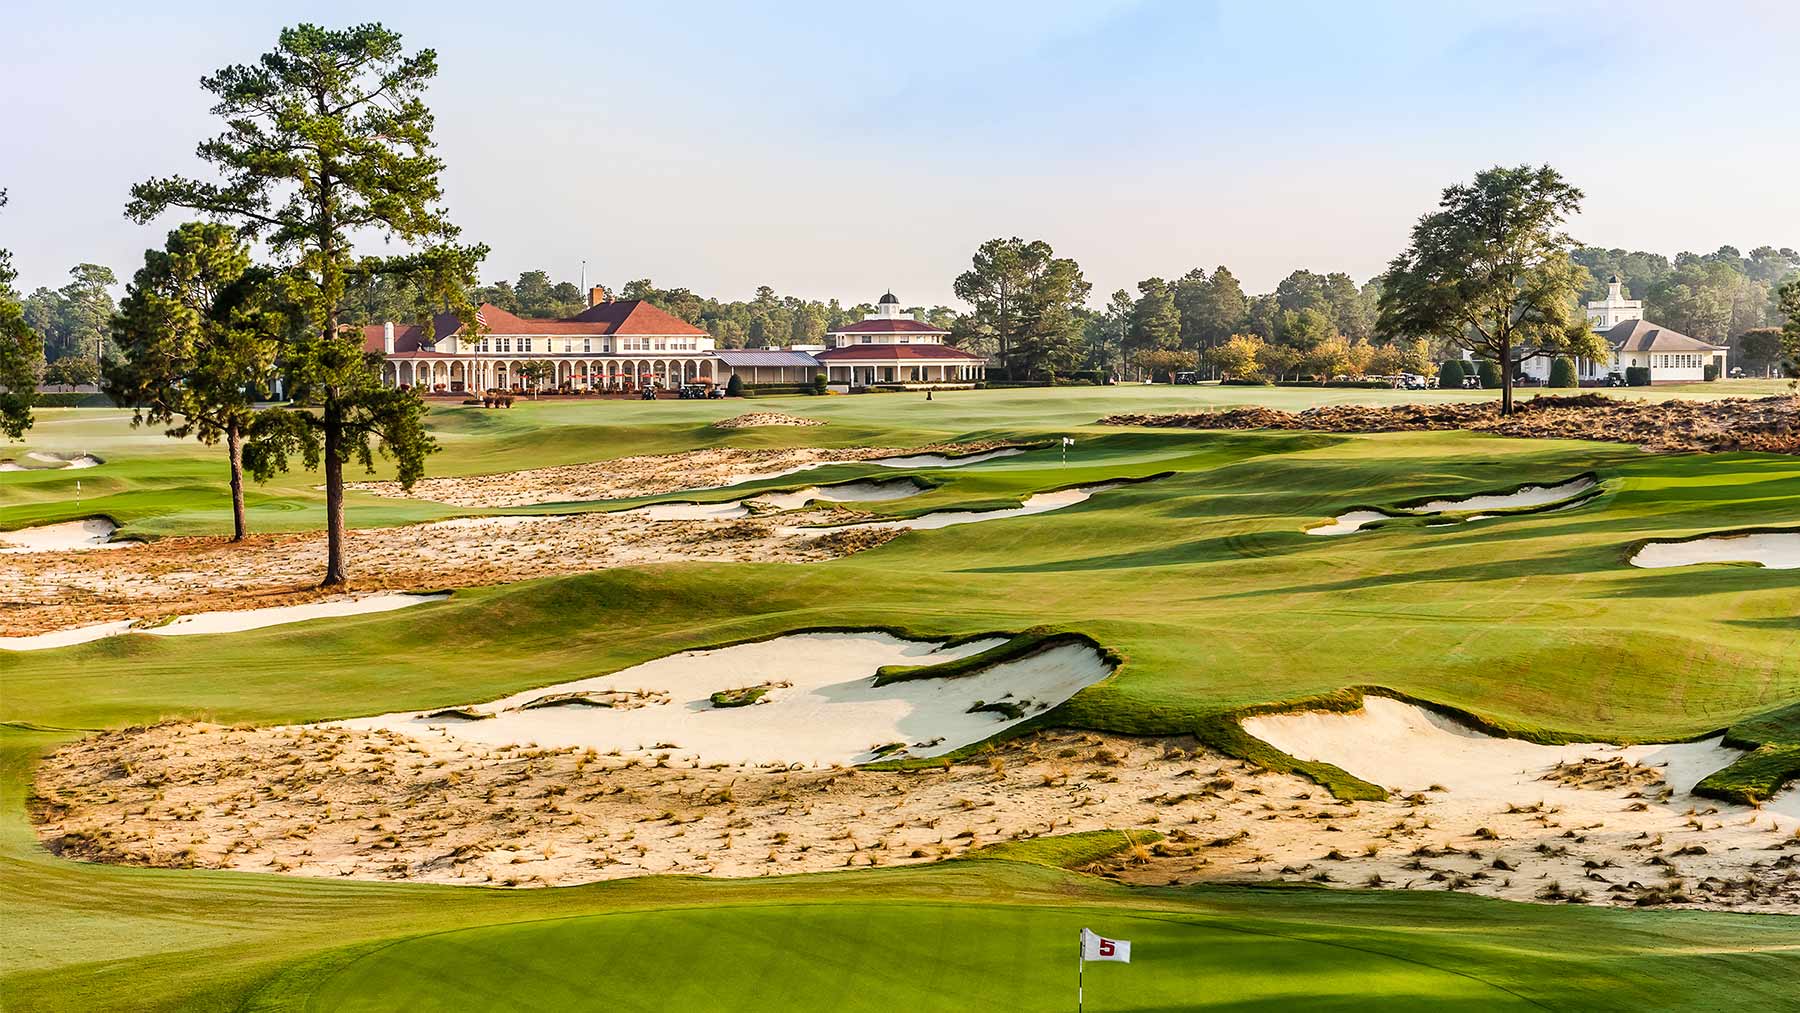 The magic number? 3. Here are the 25 best par-3 courses in the world